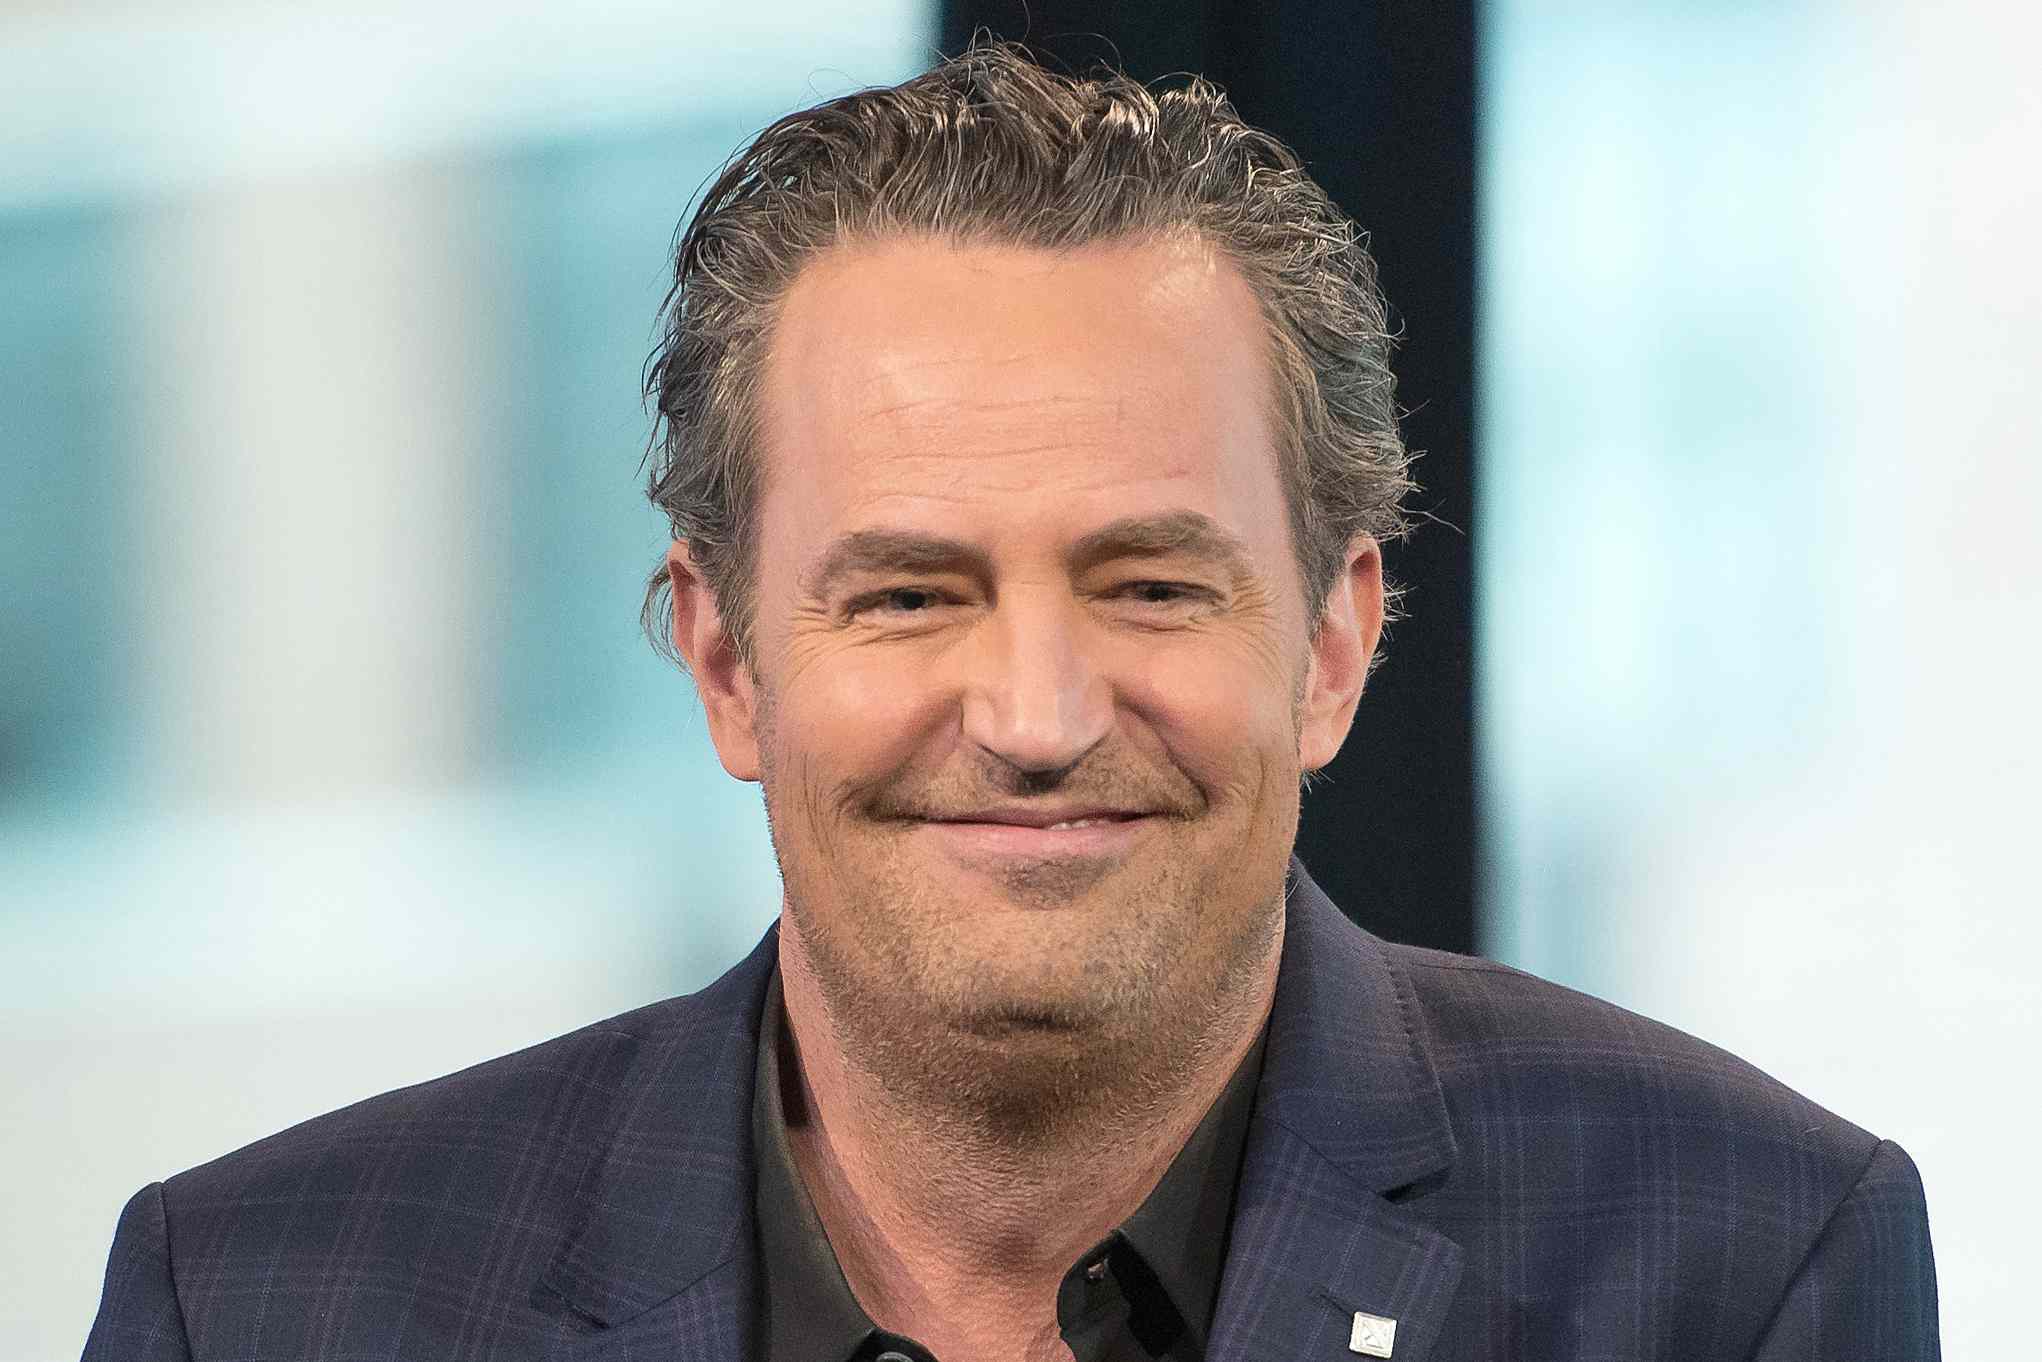 Law Enforcement Believes 'Multiple People' Should Be Charged in Matthew Perry's Ketamine Death: Source (Exclusive)